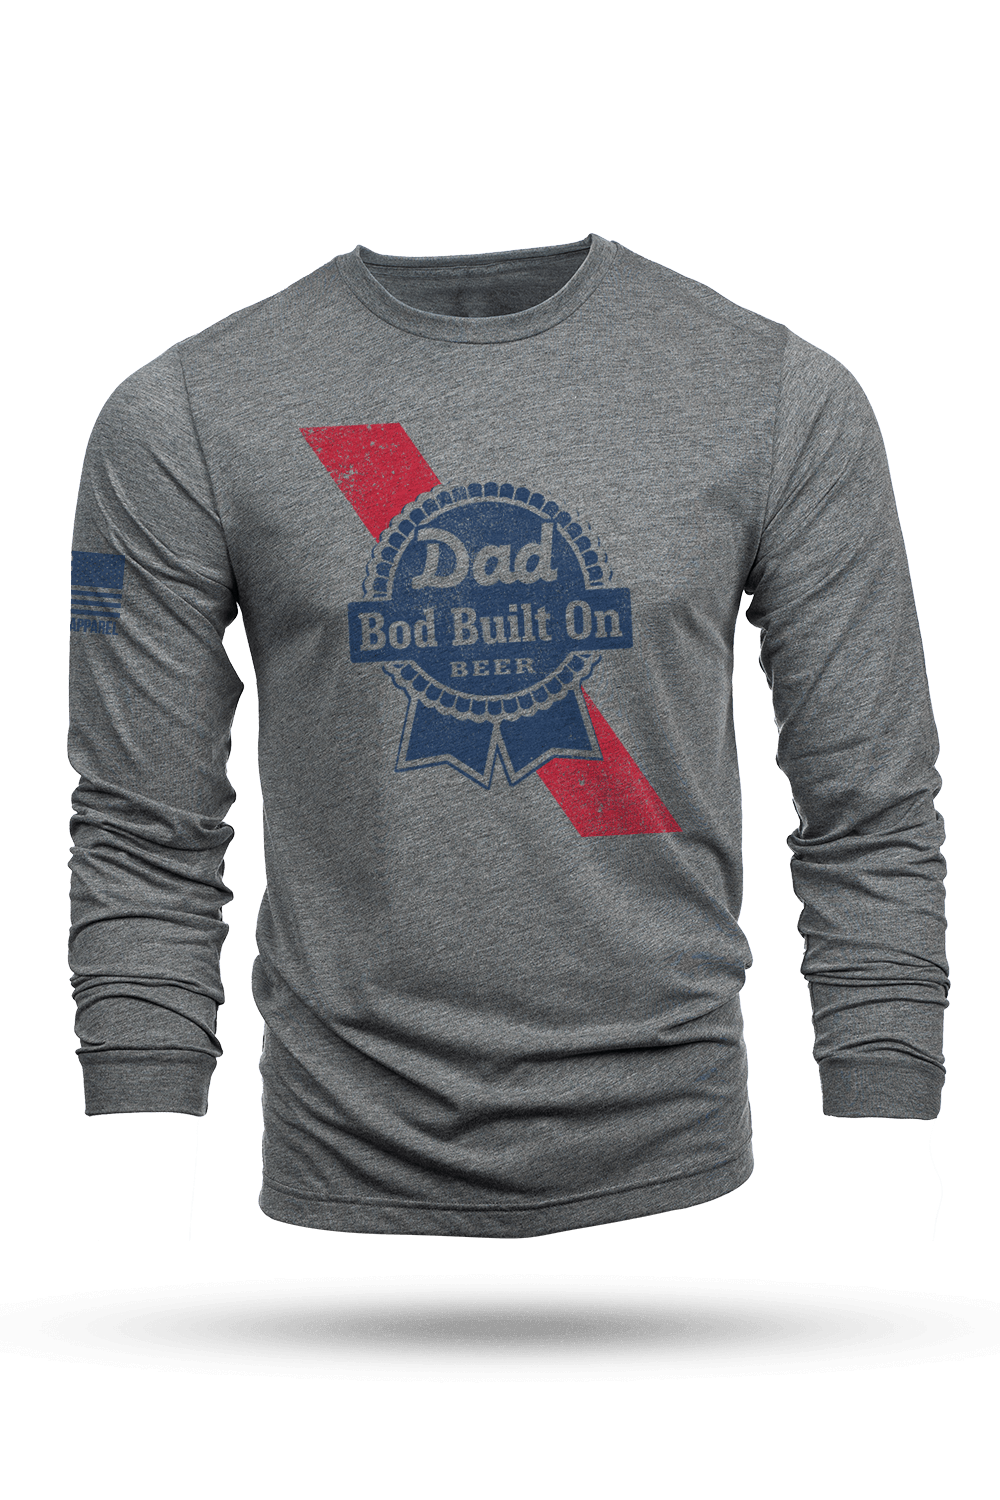 Long-Sleeve Shirt - DAD BOD FATHERS DAY